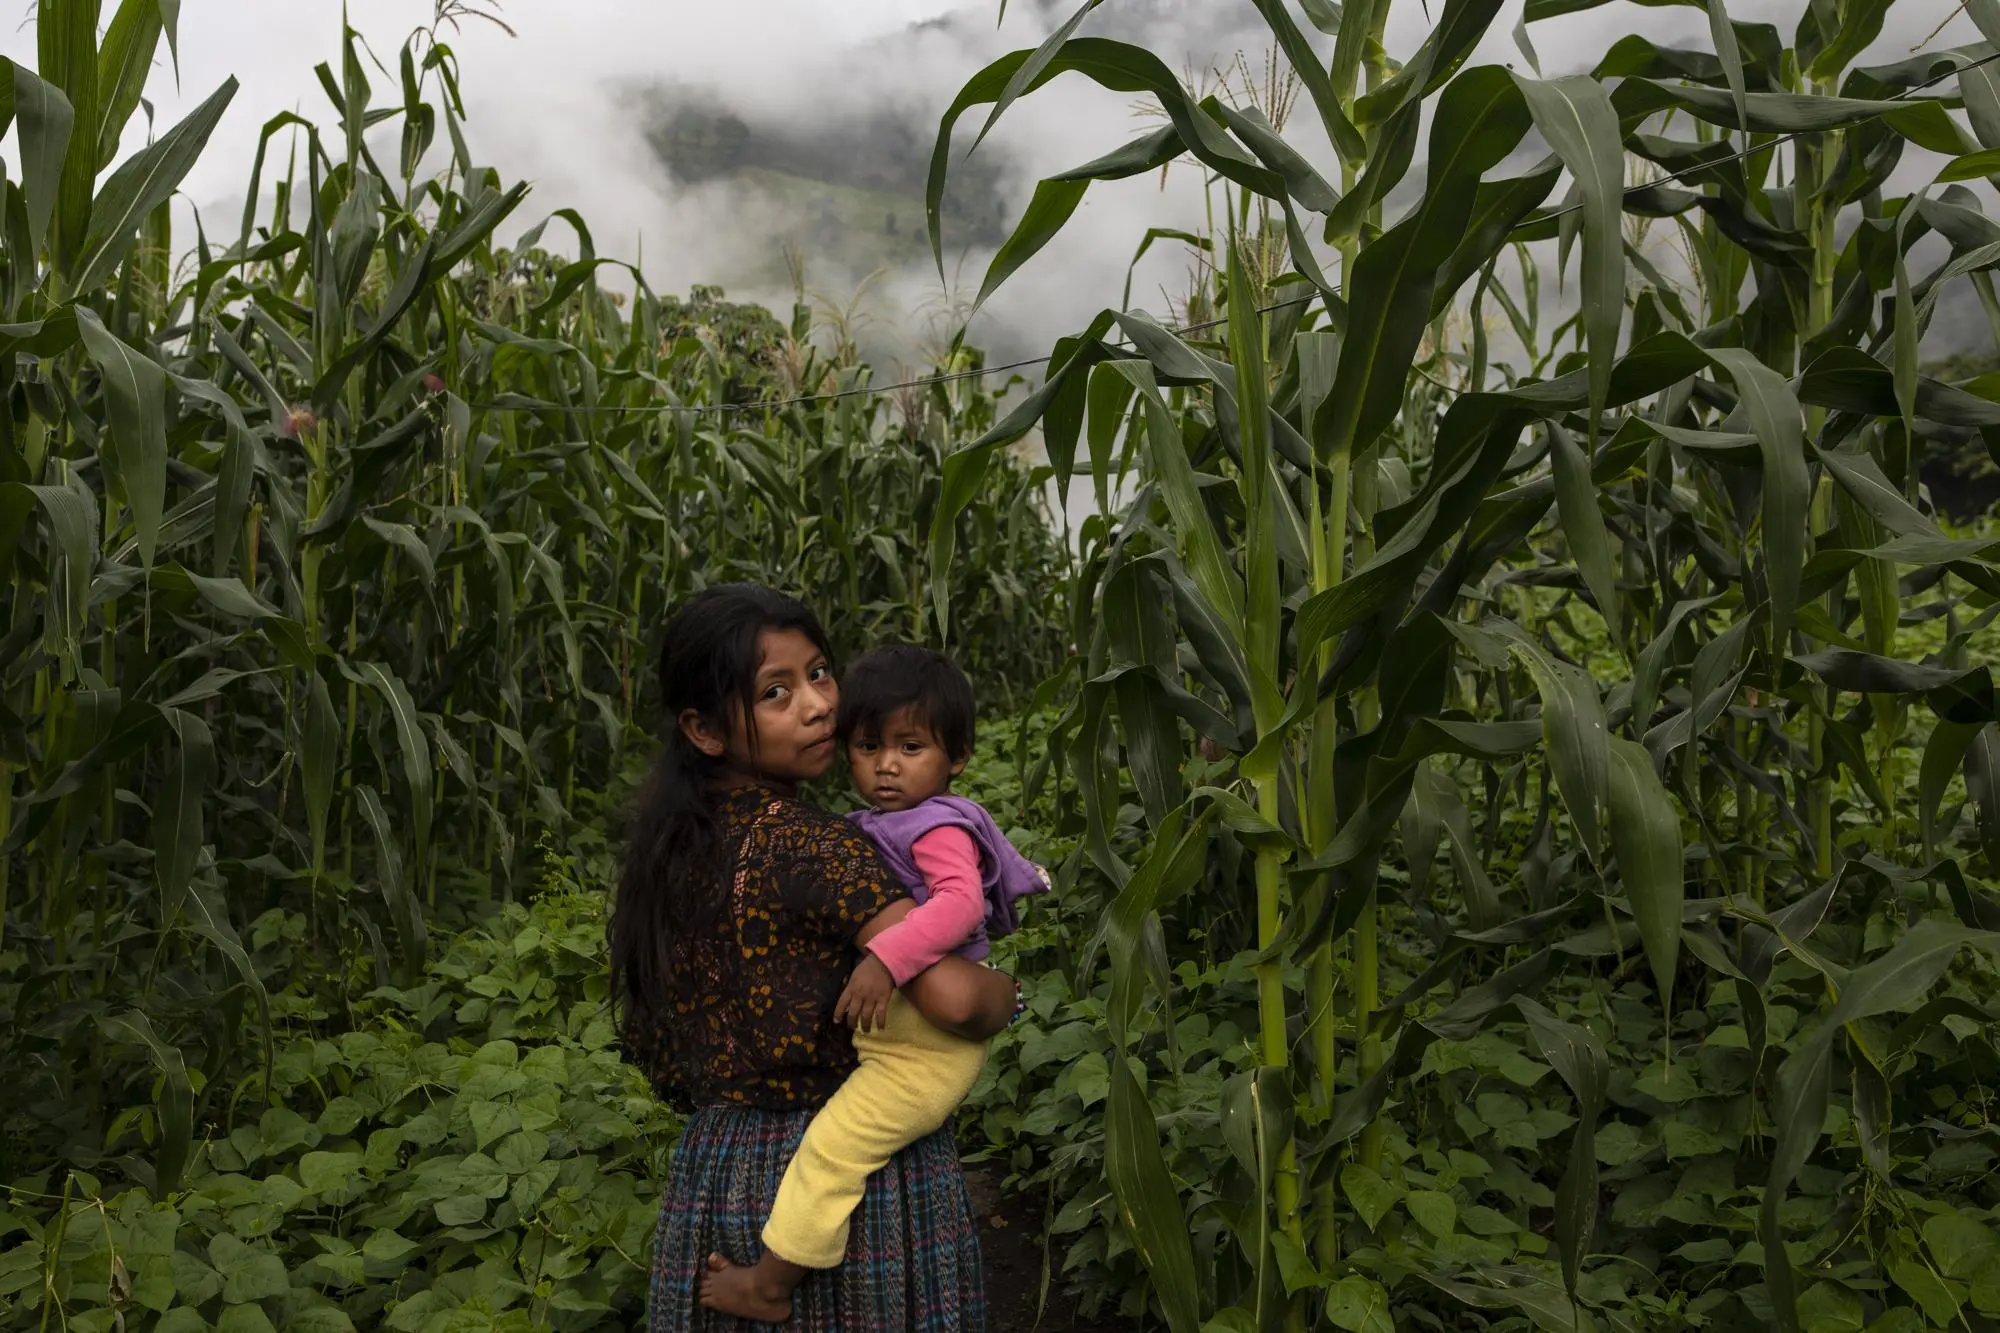 Young girl holds a child in a corn field